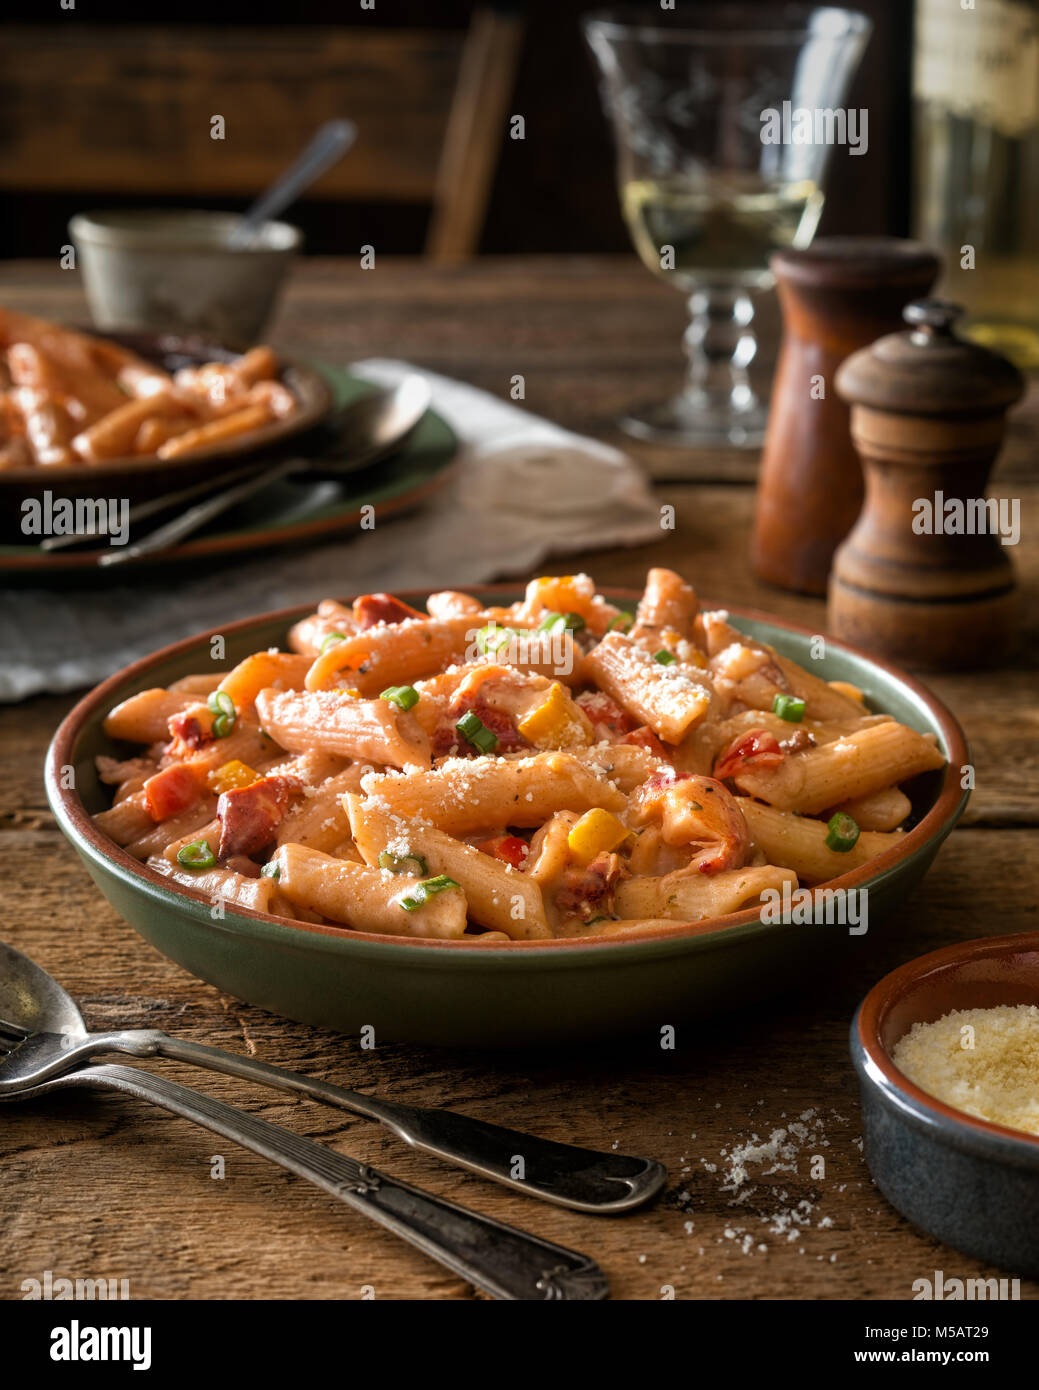 A bowl of delicious spicy cajun style pasta with lobster. Stock Photo